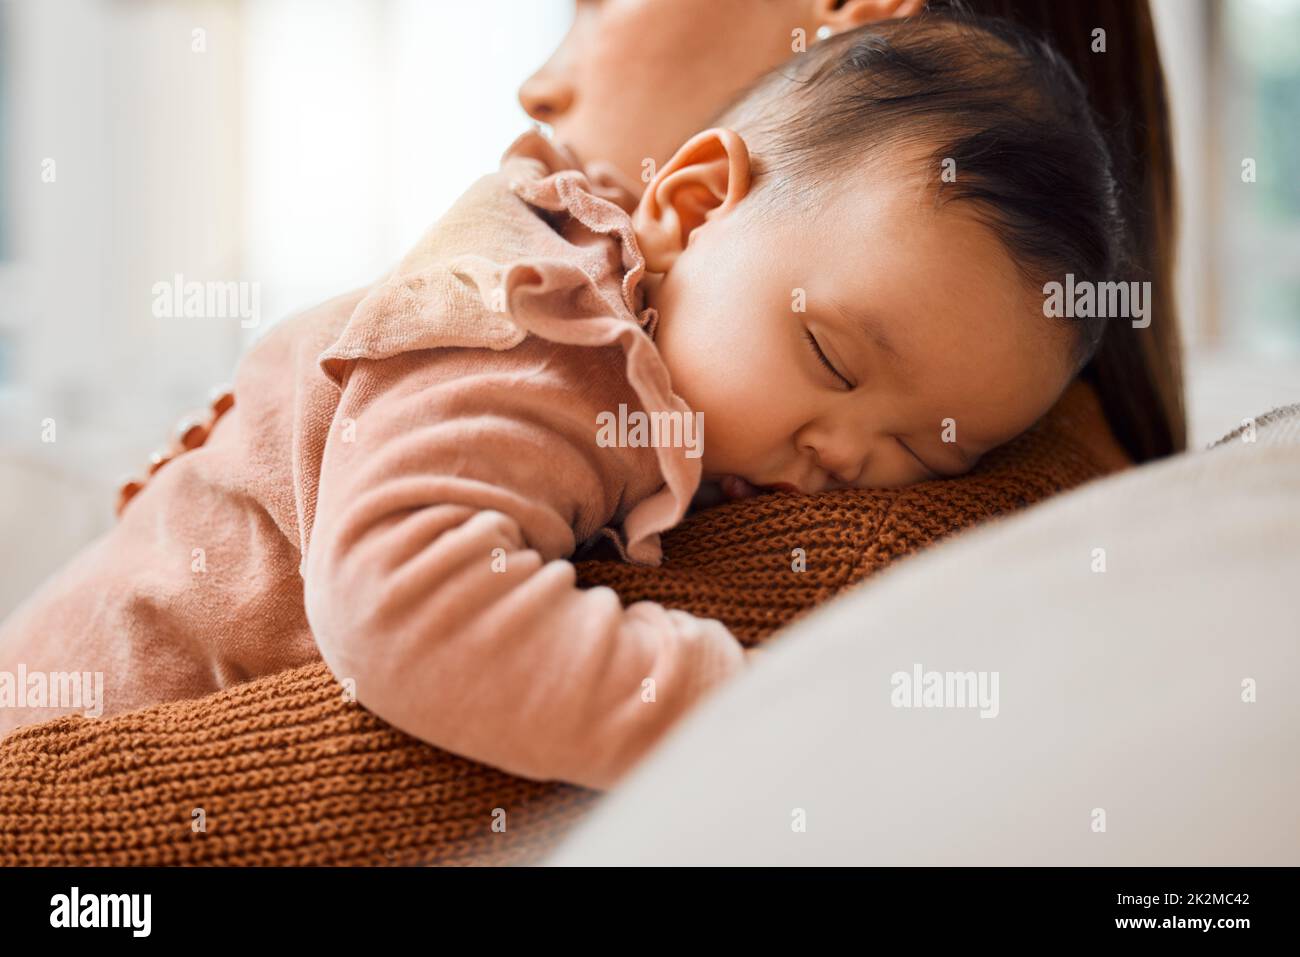 This little one loves nap time. Shot of an adorable baby girl sleeping on her mothers arms. Stock Photo